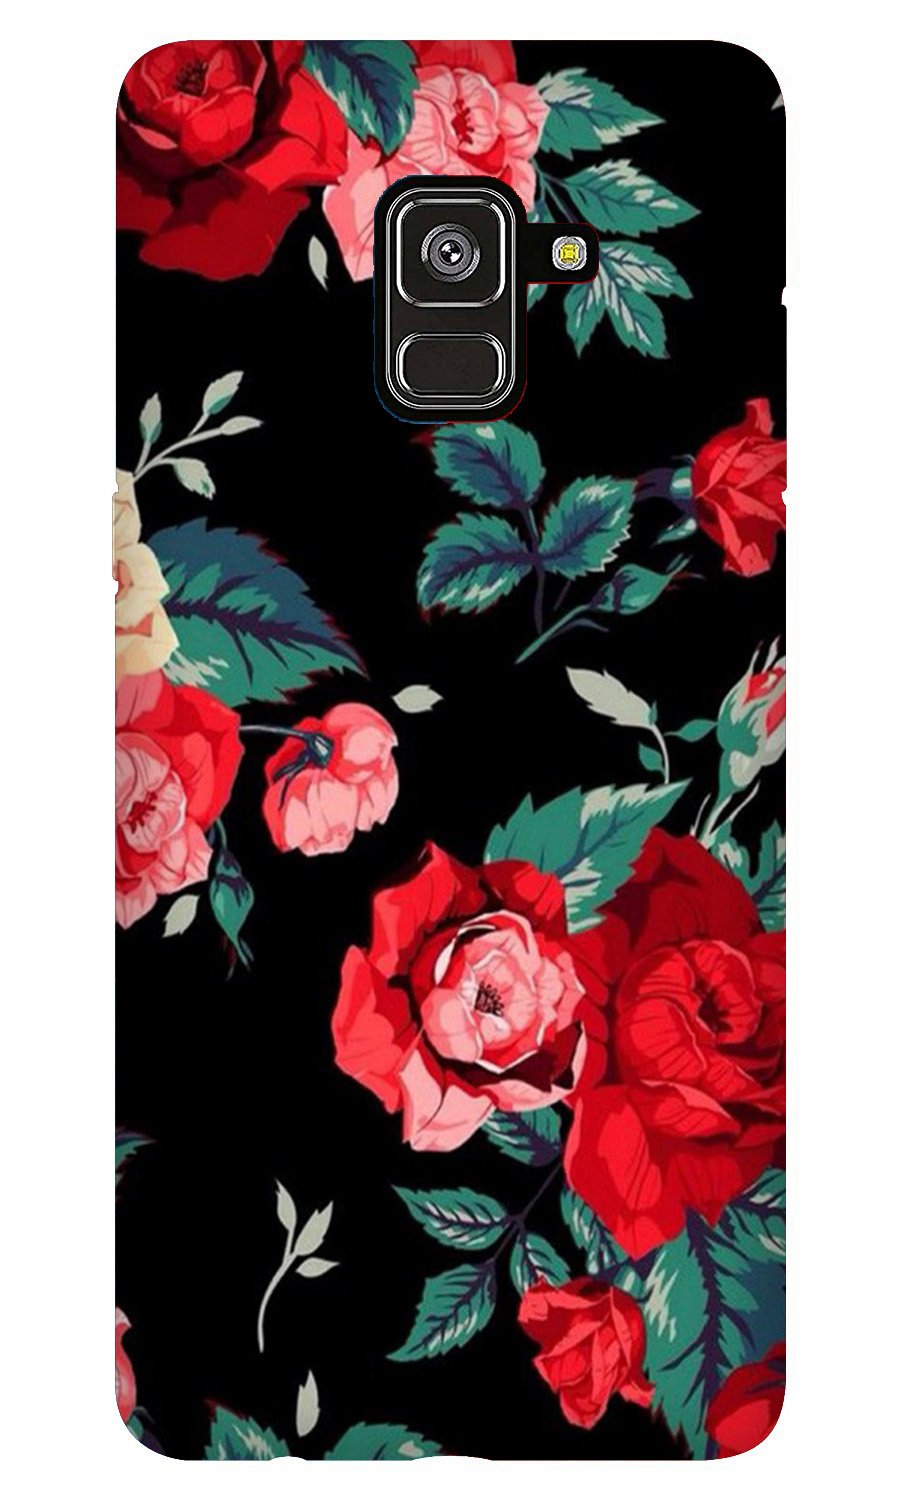 Red Rose2 Case for Galaxy A5 (2018)